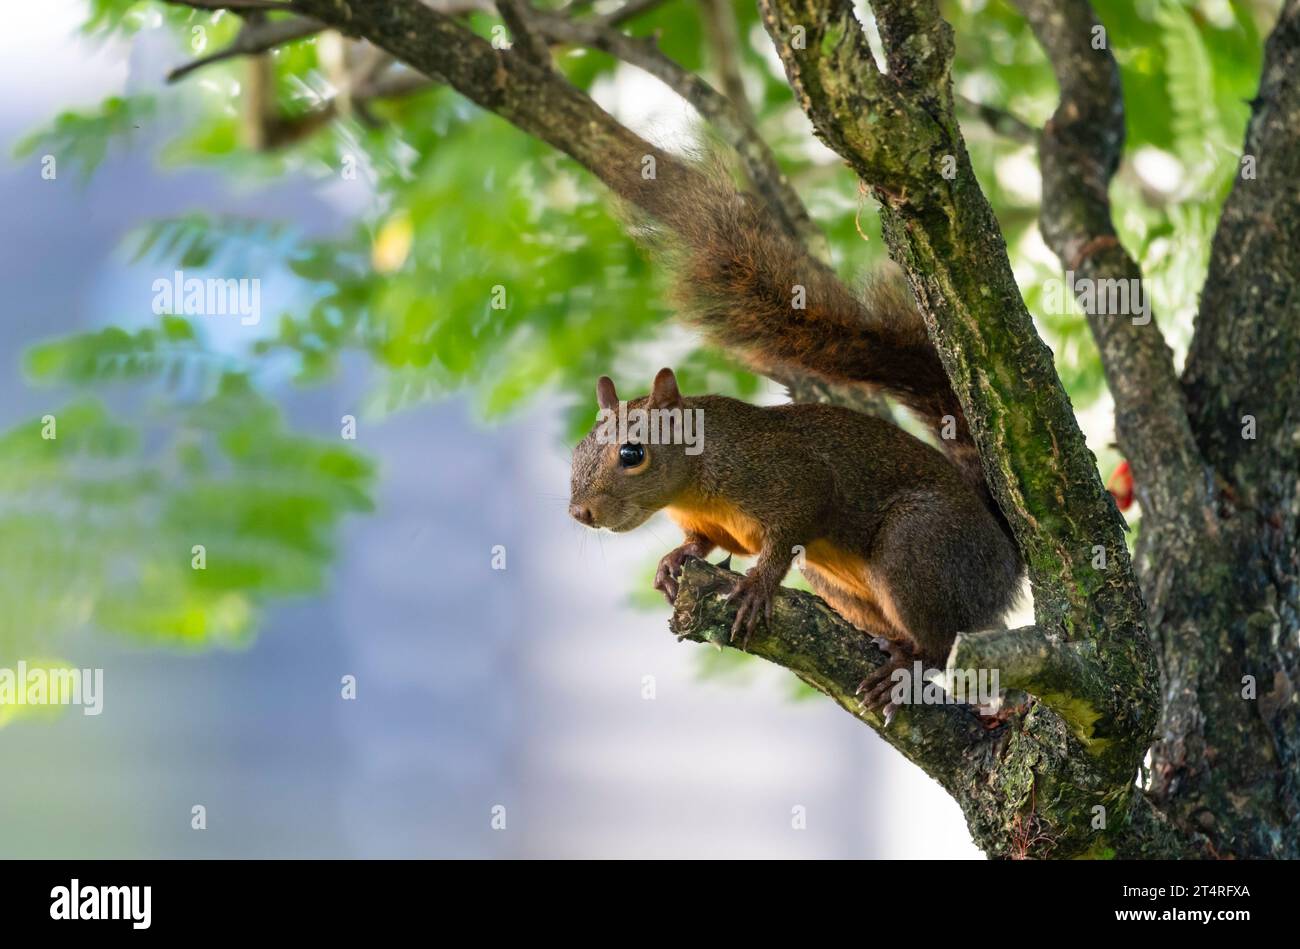 Endemic Red-tailed squirrel sitting in the shade of a tree on the island of Trinidad Stock Photo